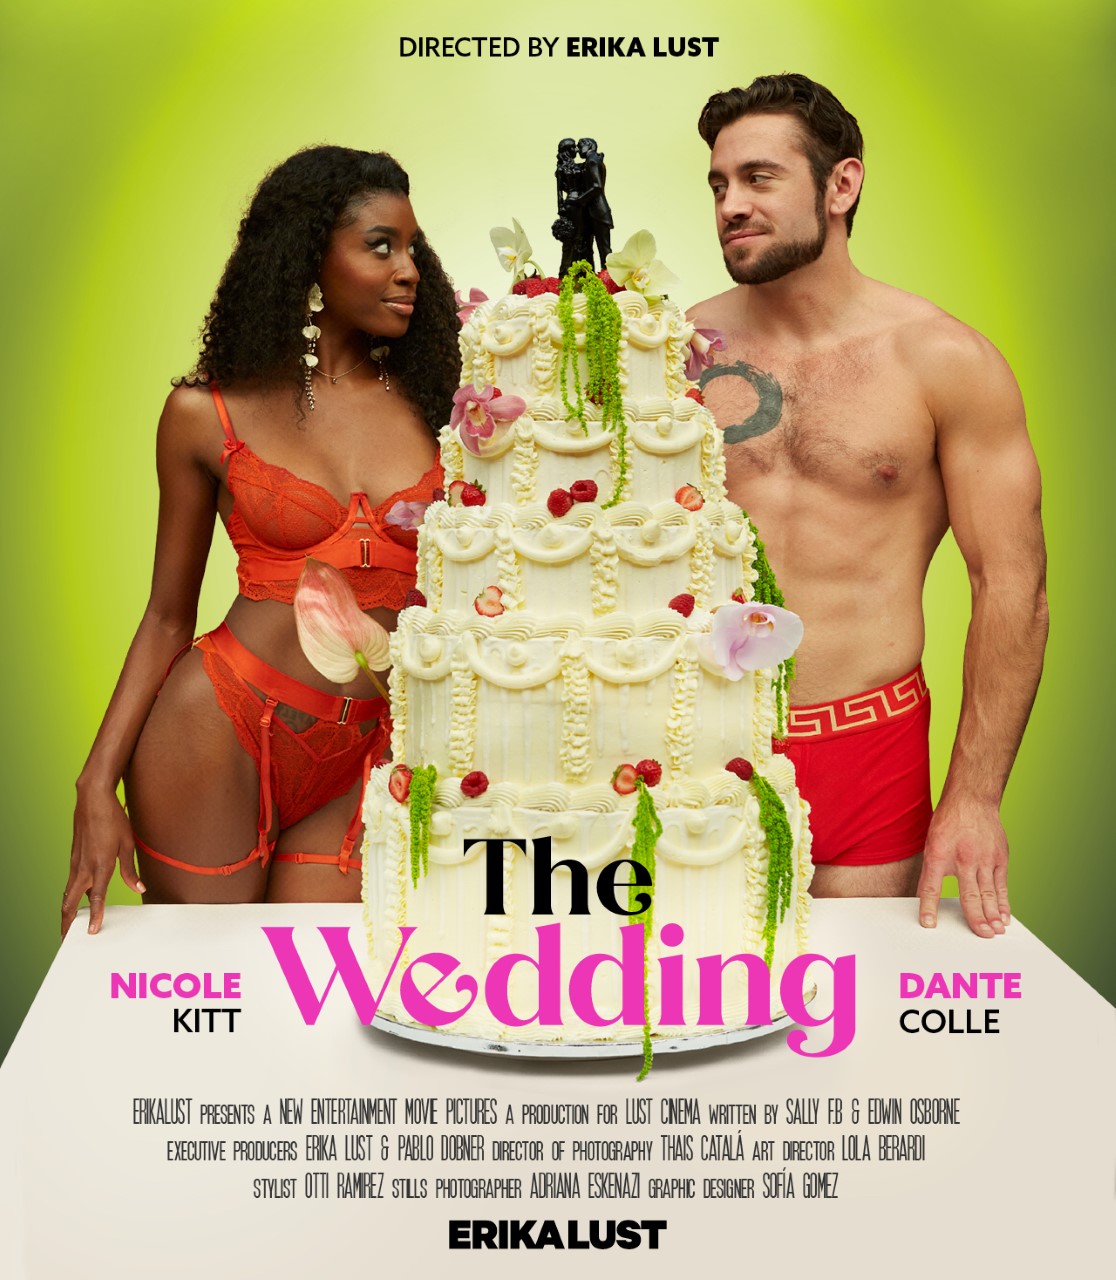 Dante Colle Stars in Lust Cinema’s Big Budget Feature Rom-Com The Wedding